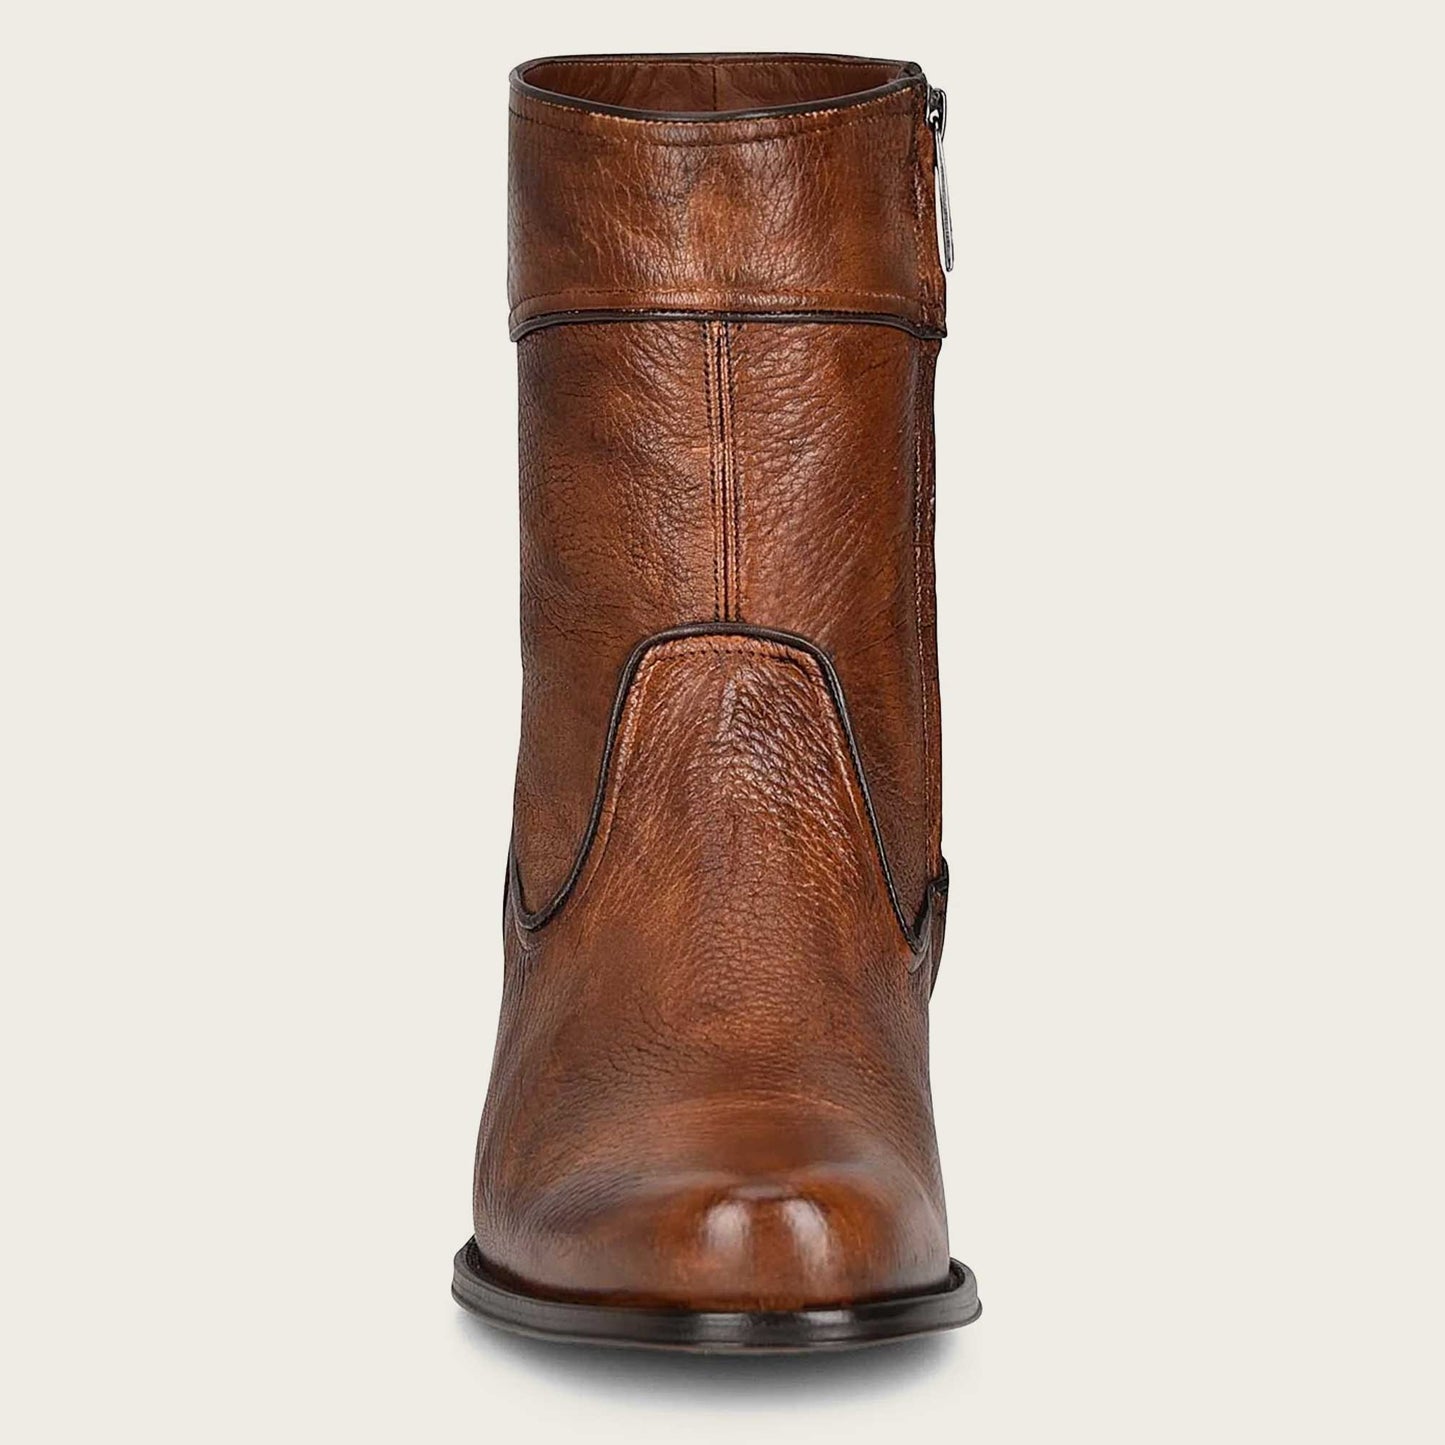 Honey leather boot with hand-painted finish and metallic accents for men and women by Cuadra